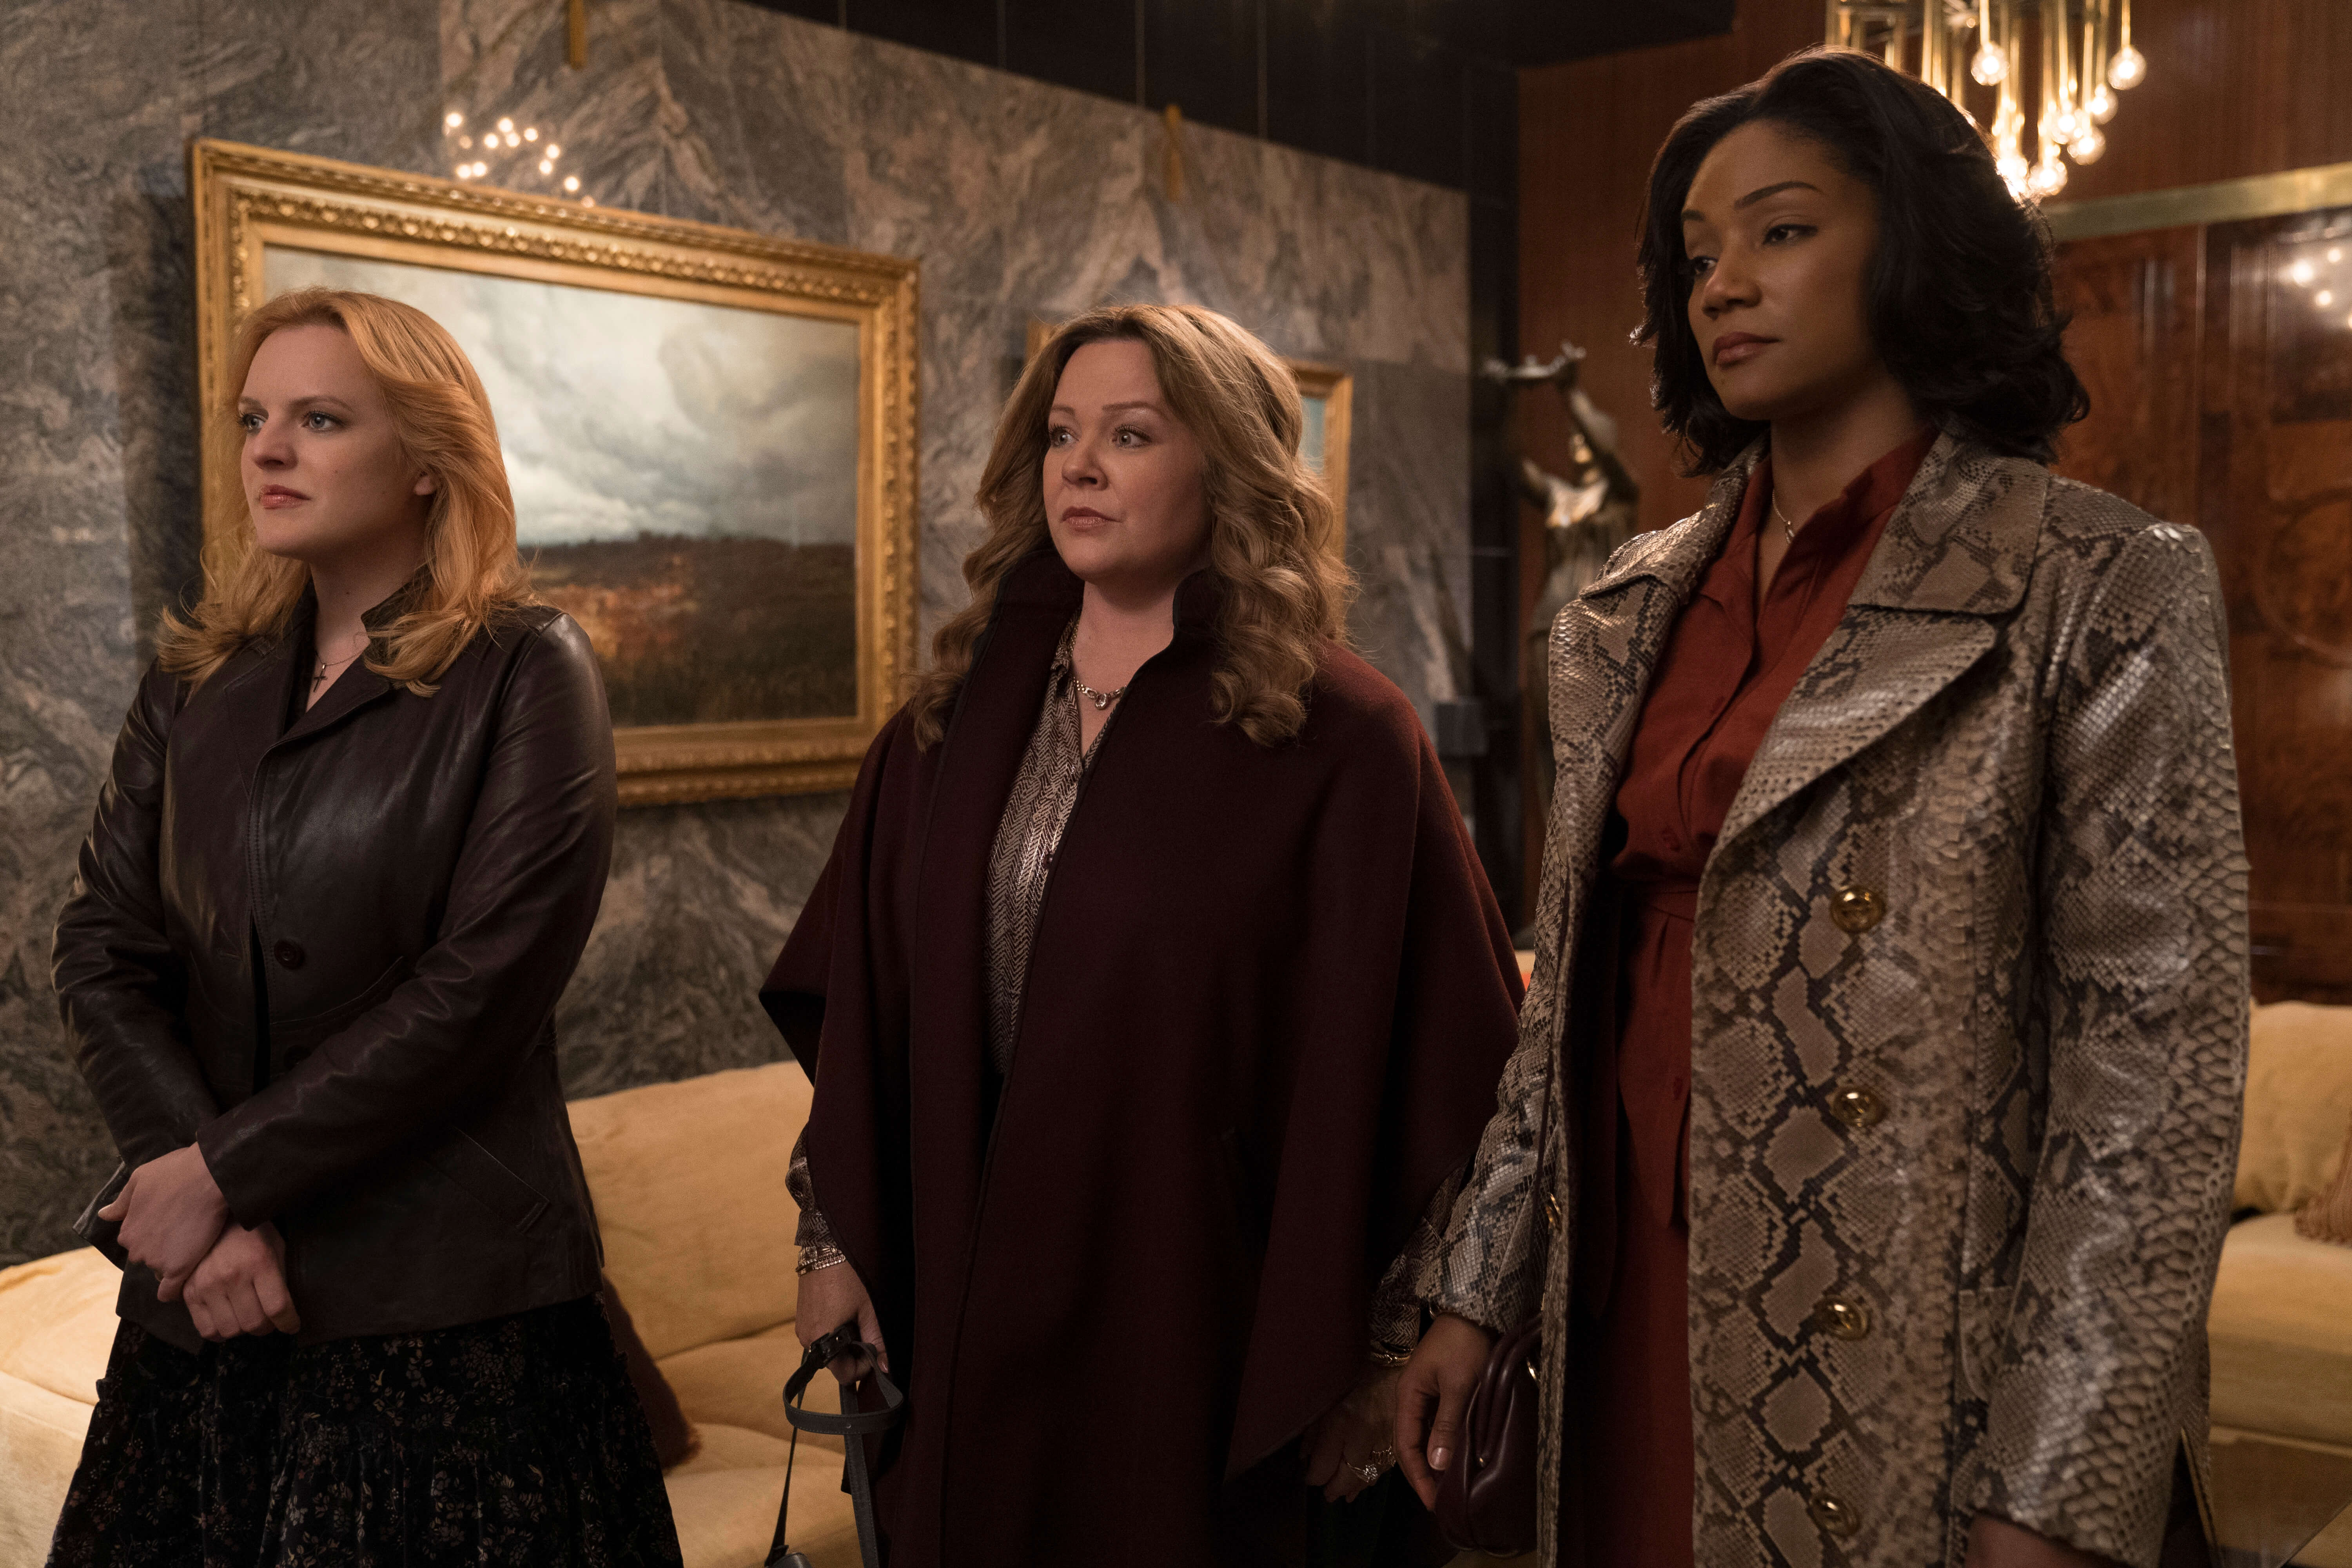 (L-R) ELISABETH MOSS as Claire, MELISSA McCARTHY as Kathy and TIFFANY HADDISH as Ruby in New Line Cinema’s mob drama “The Kitchen,” a Warner Bros. Pictures release. (Photo Credit: Alison Cohen Rosa) Copyright: © 2019 WARNER BROS. ENTERTAINMENT INC.